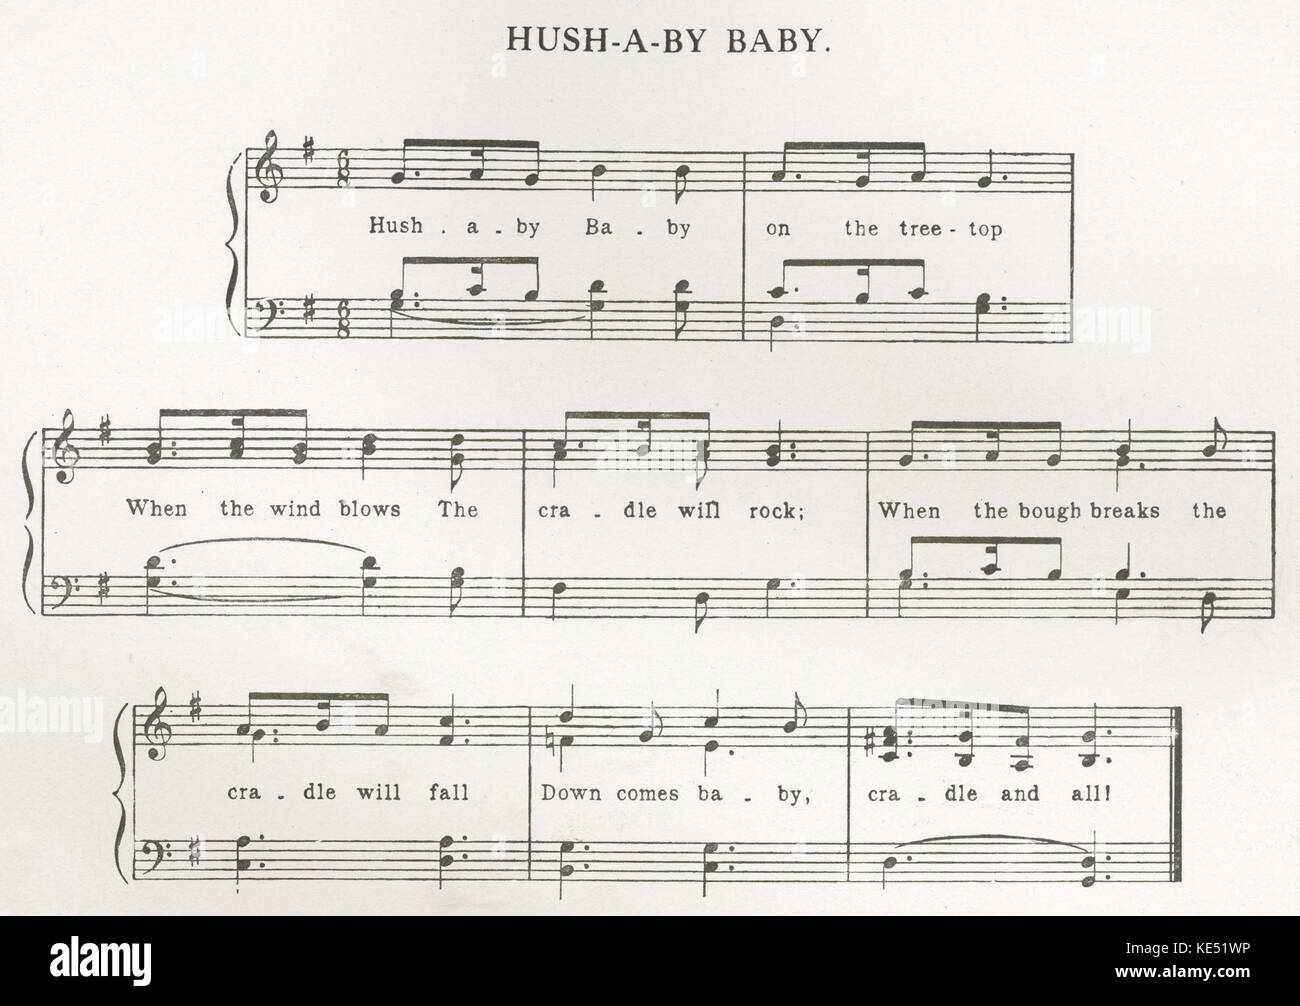 'Hush - A - By - Baby' - score and lyrics of the popular children 's song and nursery rhyme. Lullaby. Lullabies. Cradle song. Stock Photo